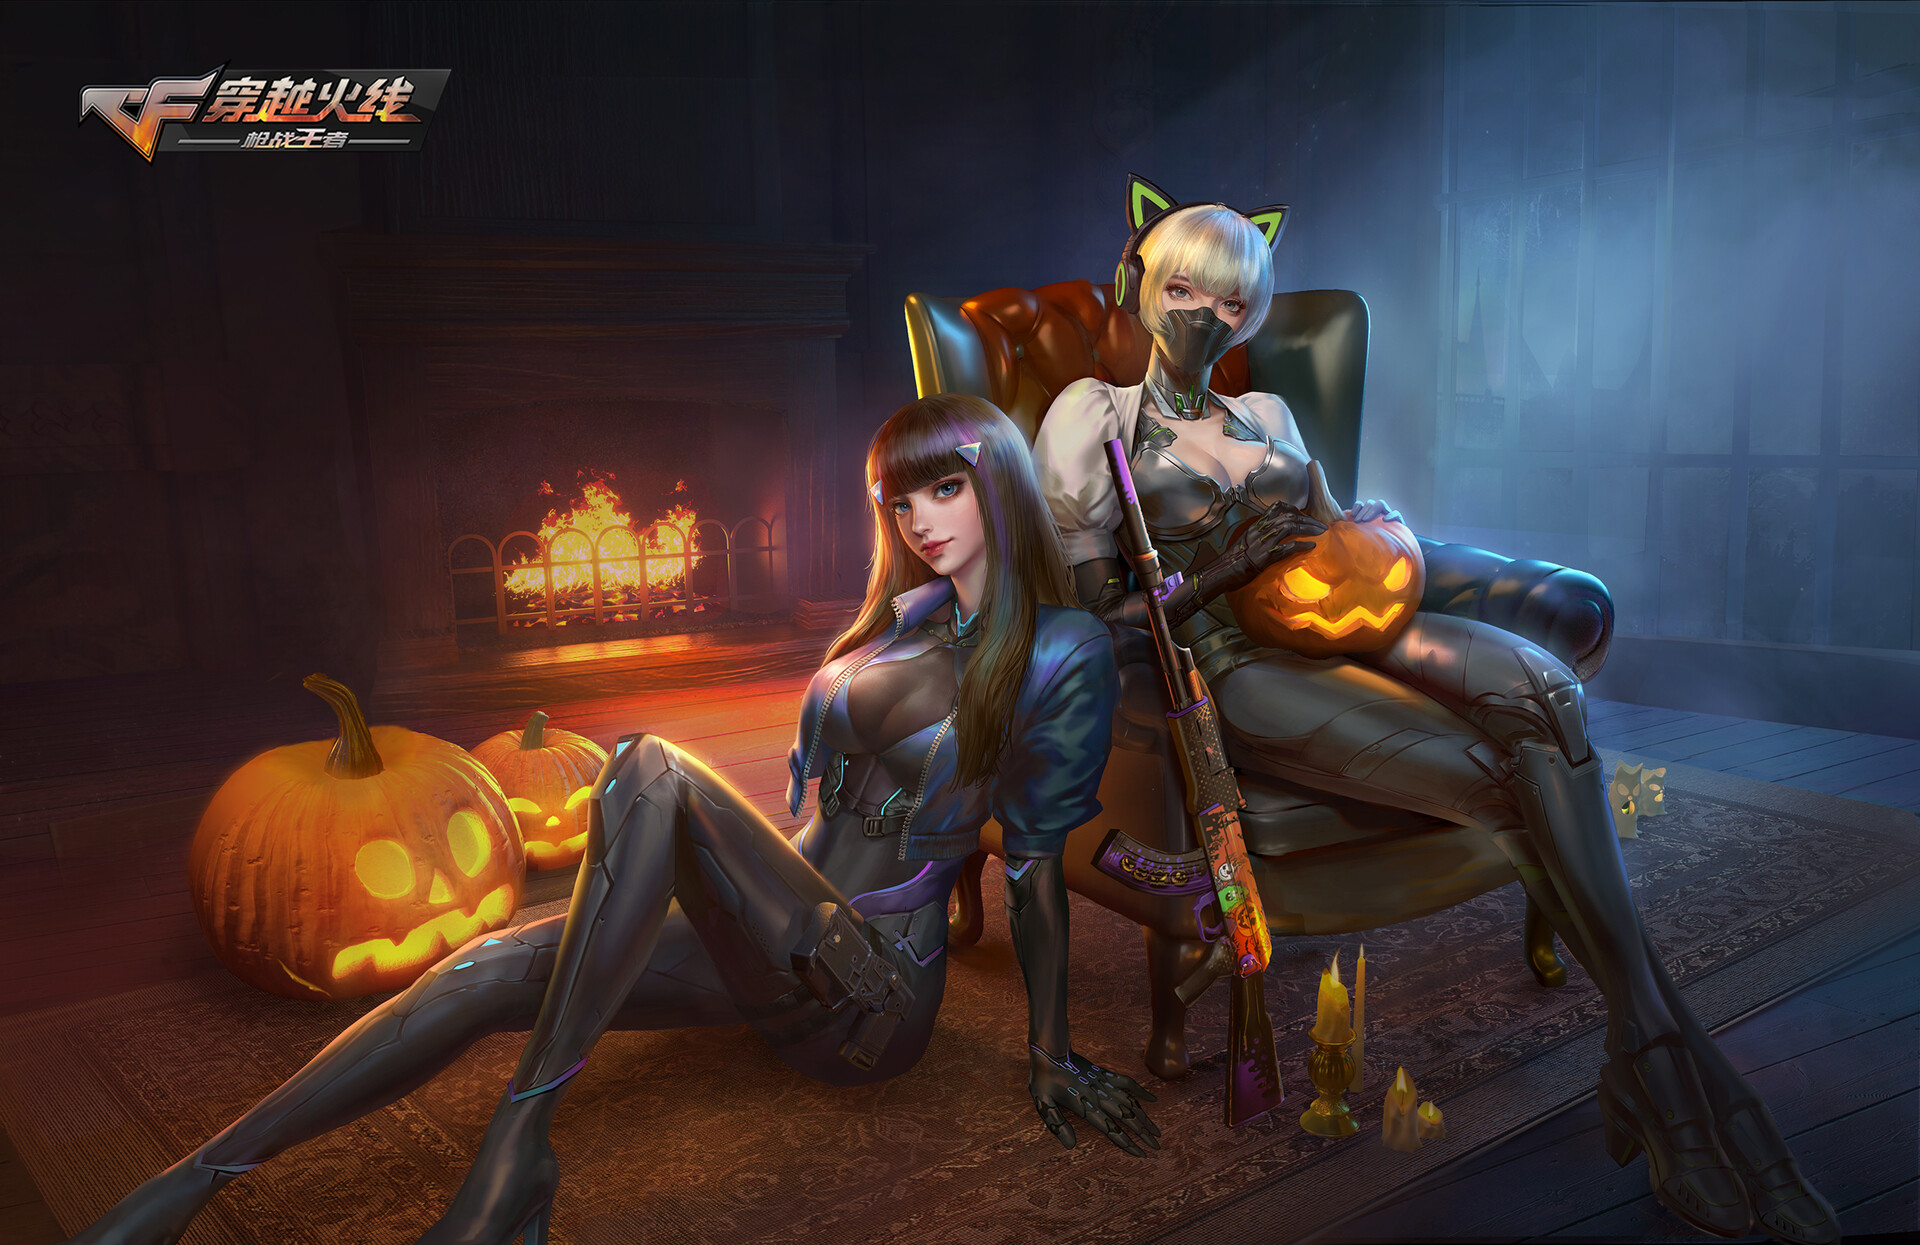 CrossFire Women Pumpkin Weapon Earphones Fire Candles Couch Video Games Video Game Girls Video Game  1920x1245